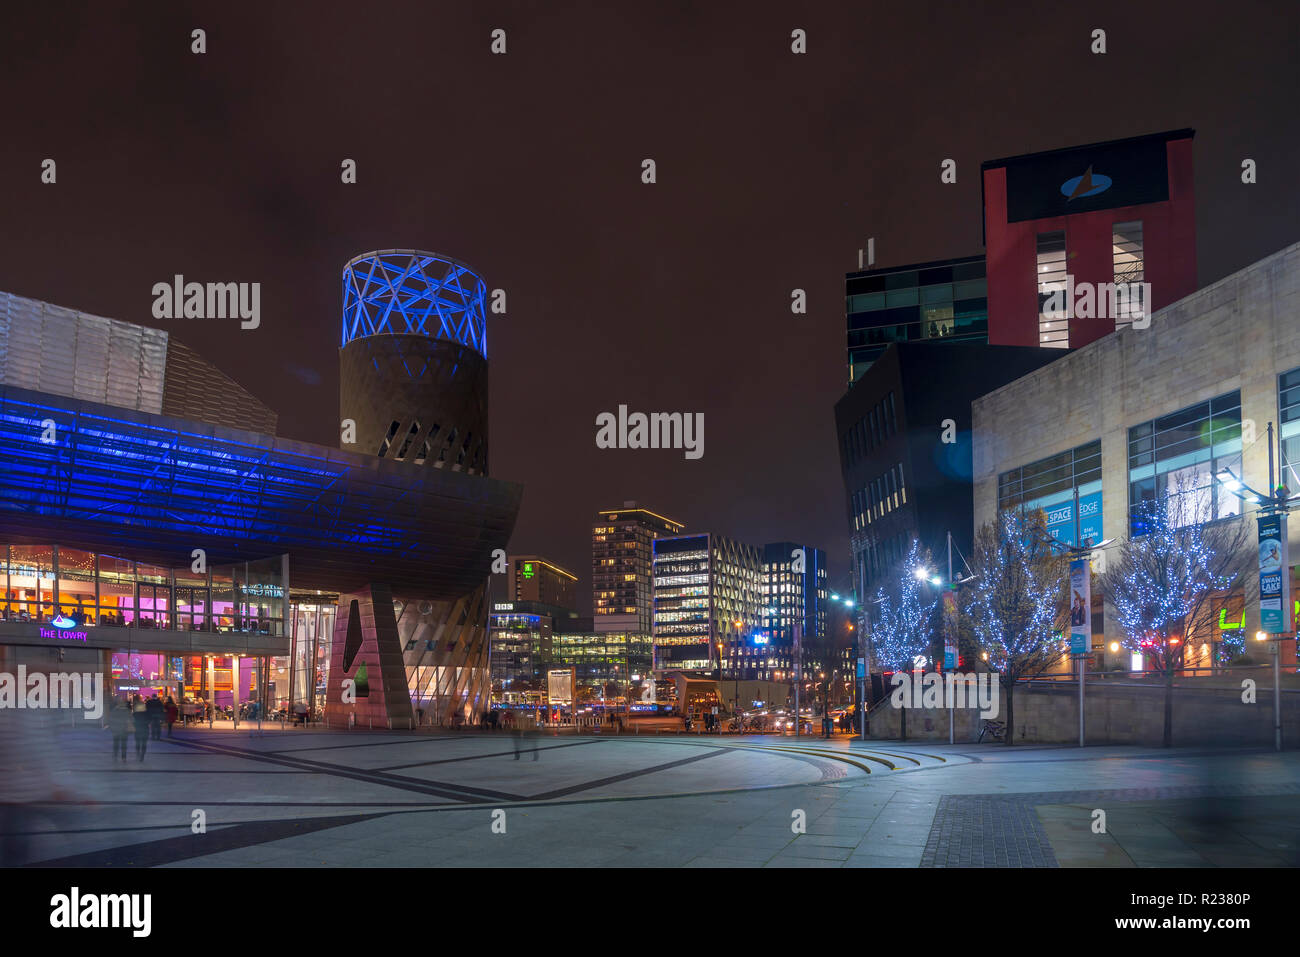 Salford Quays Media city at night. The Lowry Theatre and Art Gallery. Stock Photo